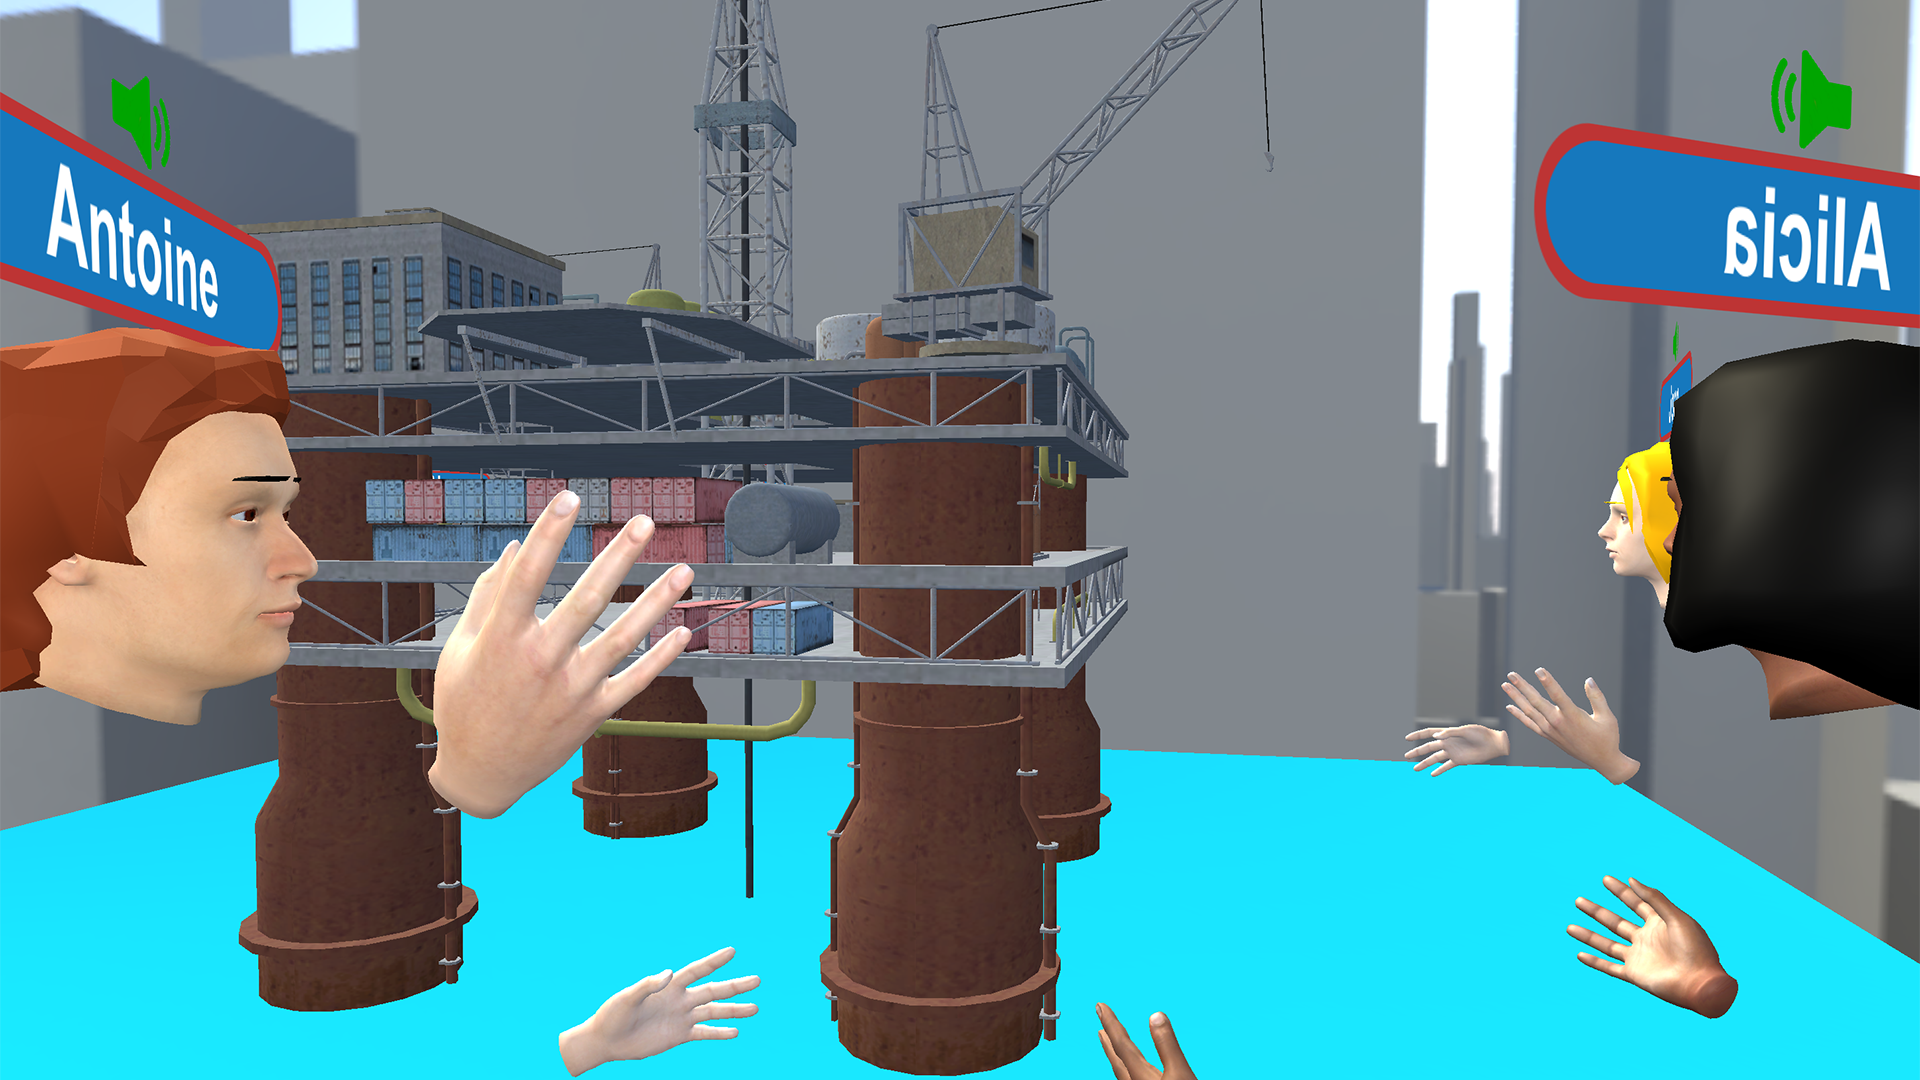 image of a number of avatars in a encrypted model room looking at a model of an off-shore oil rig